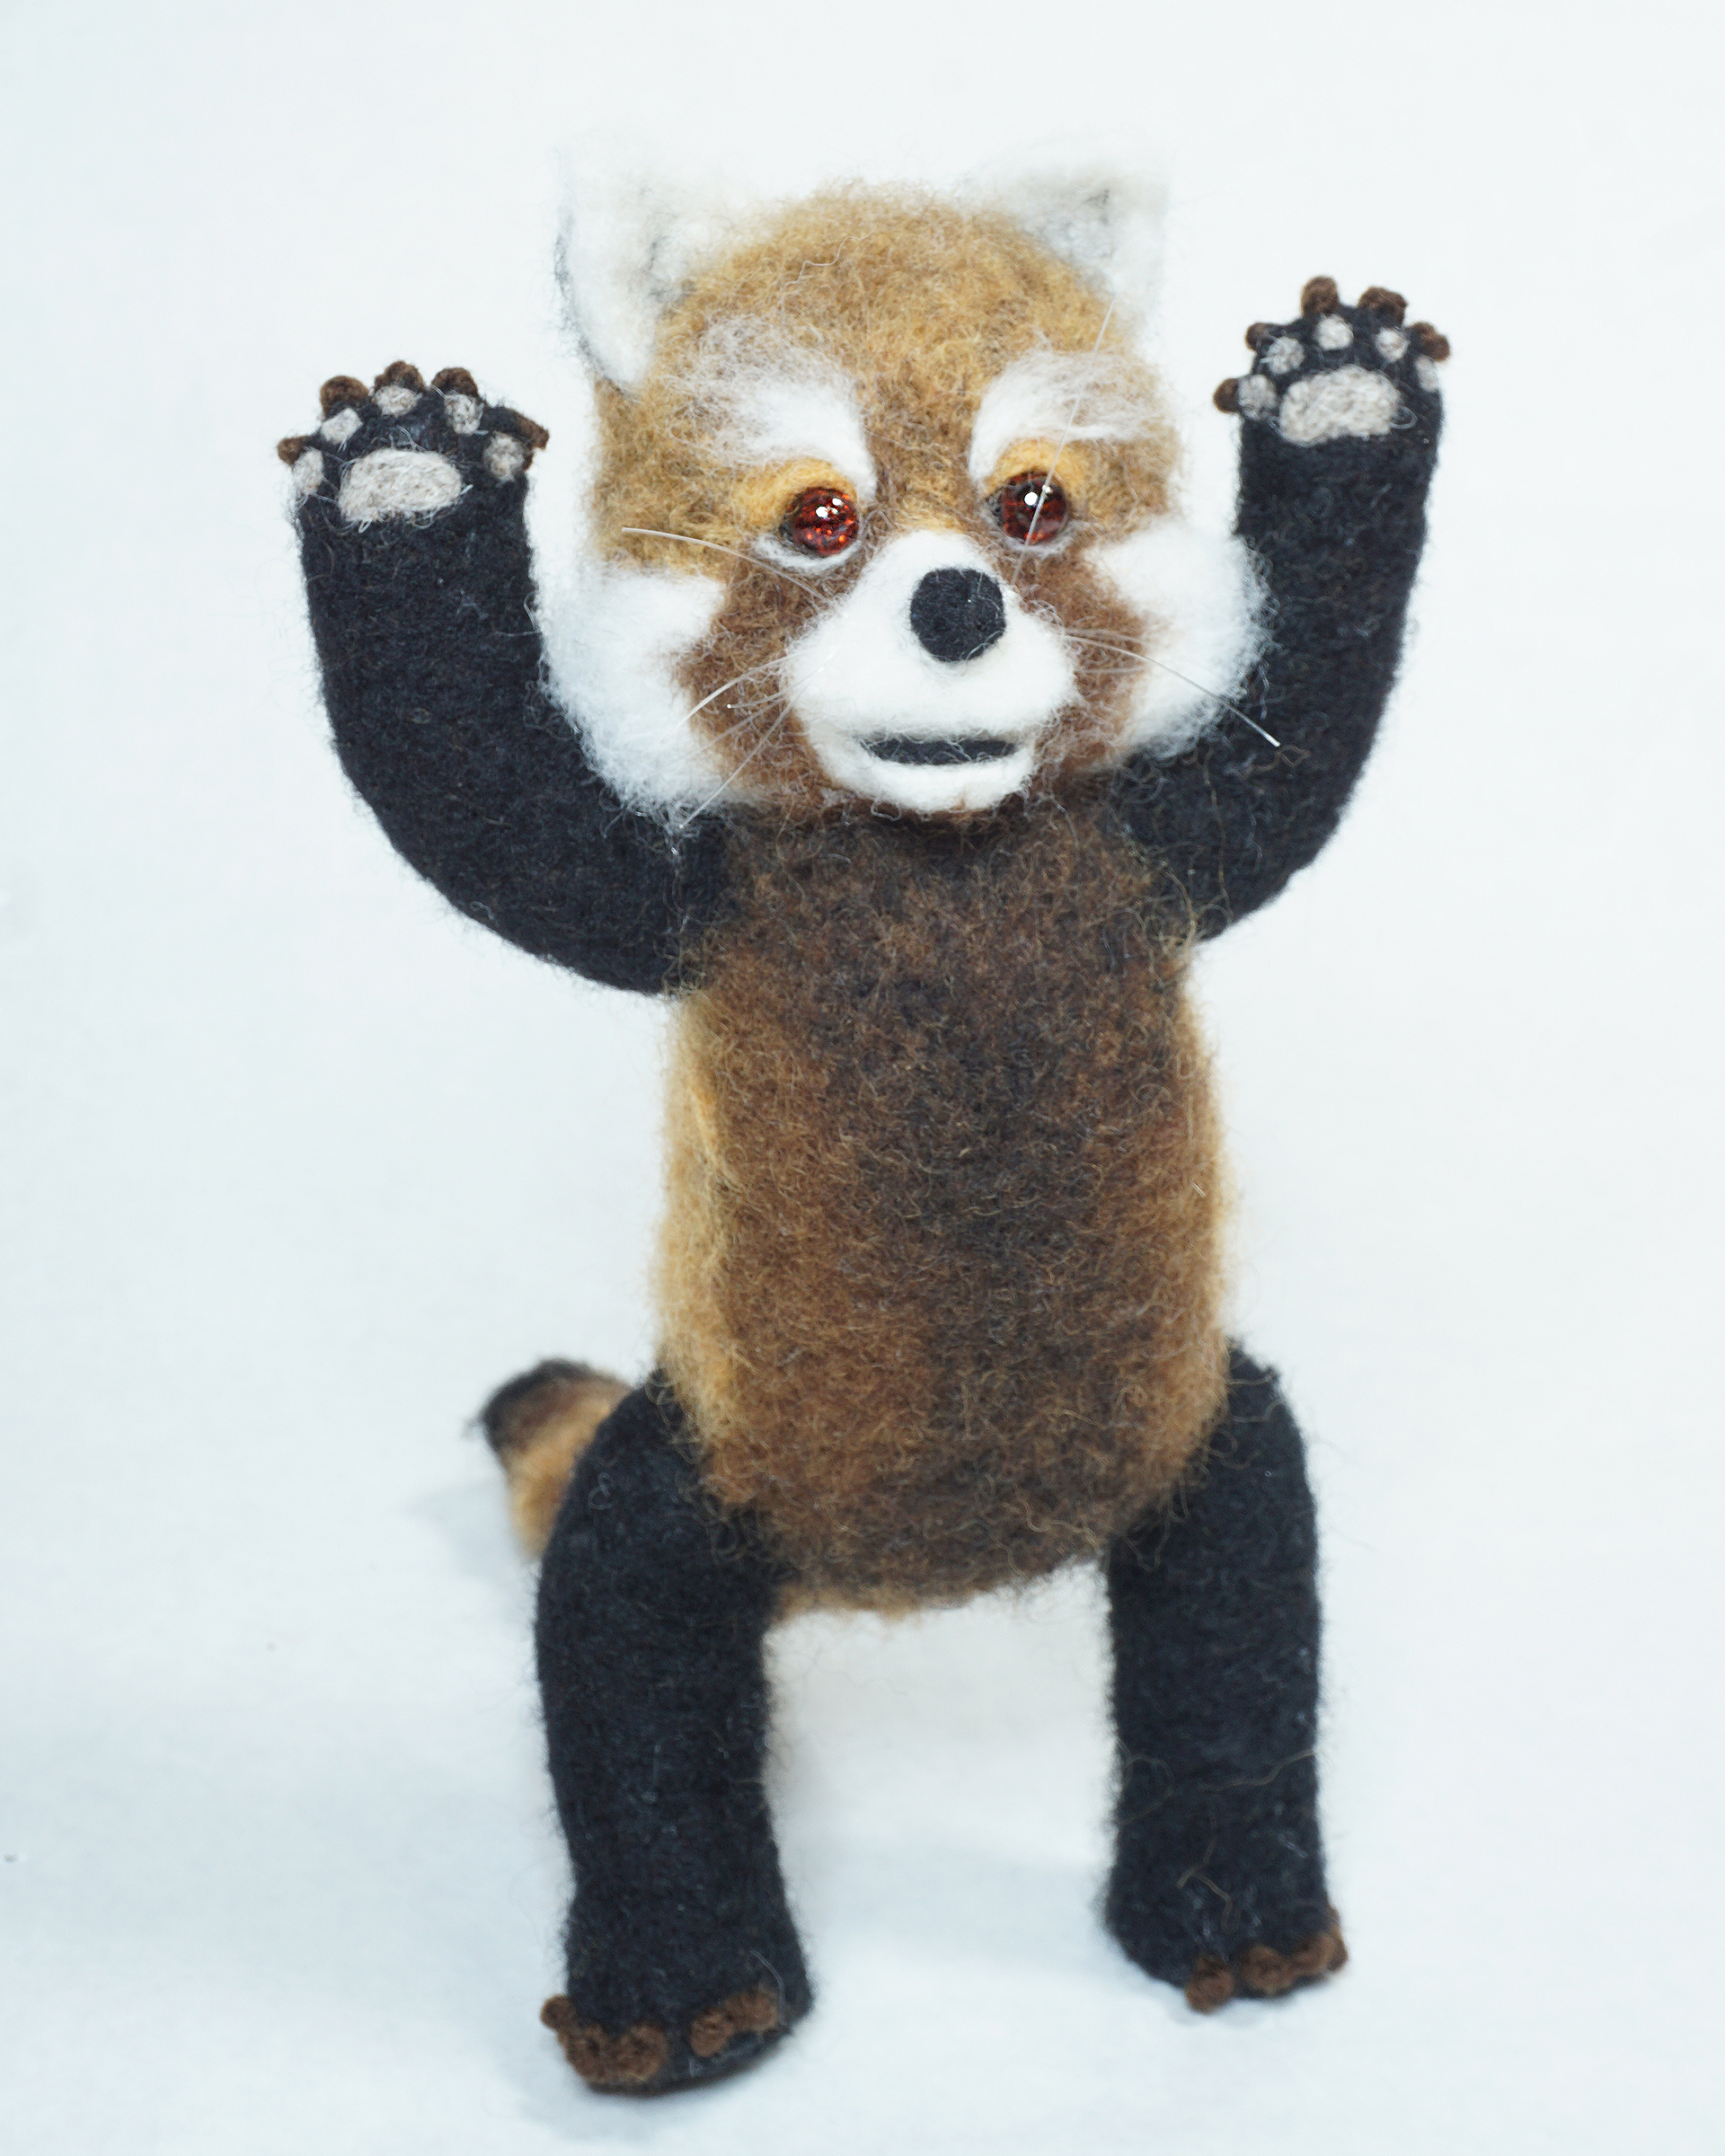 needle felted anthropomorphic red panda art doll figure sculpture attempting to be intimidating